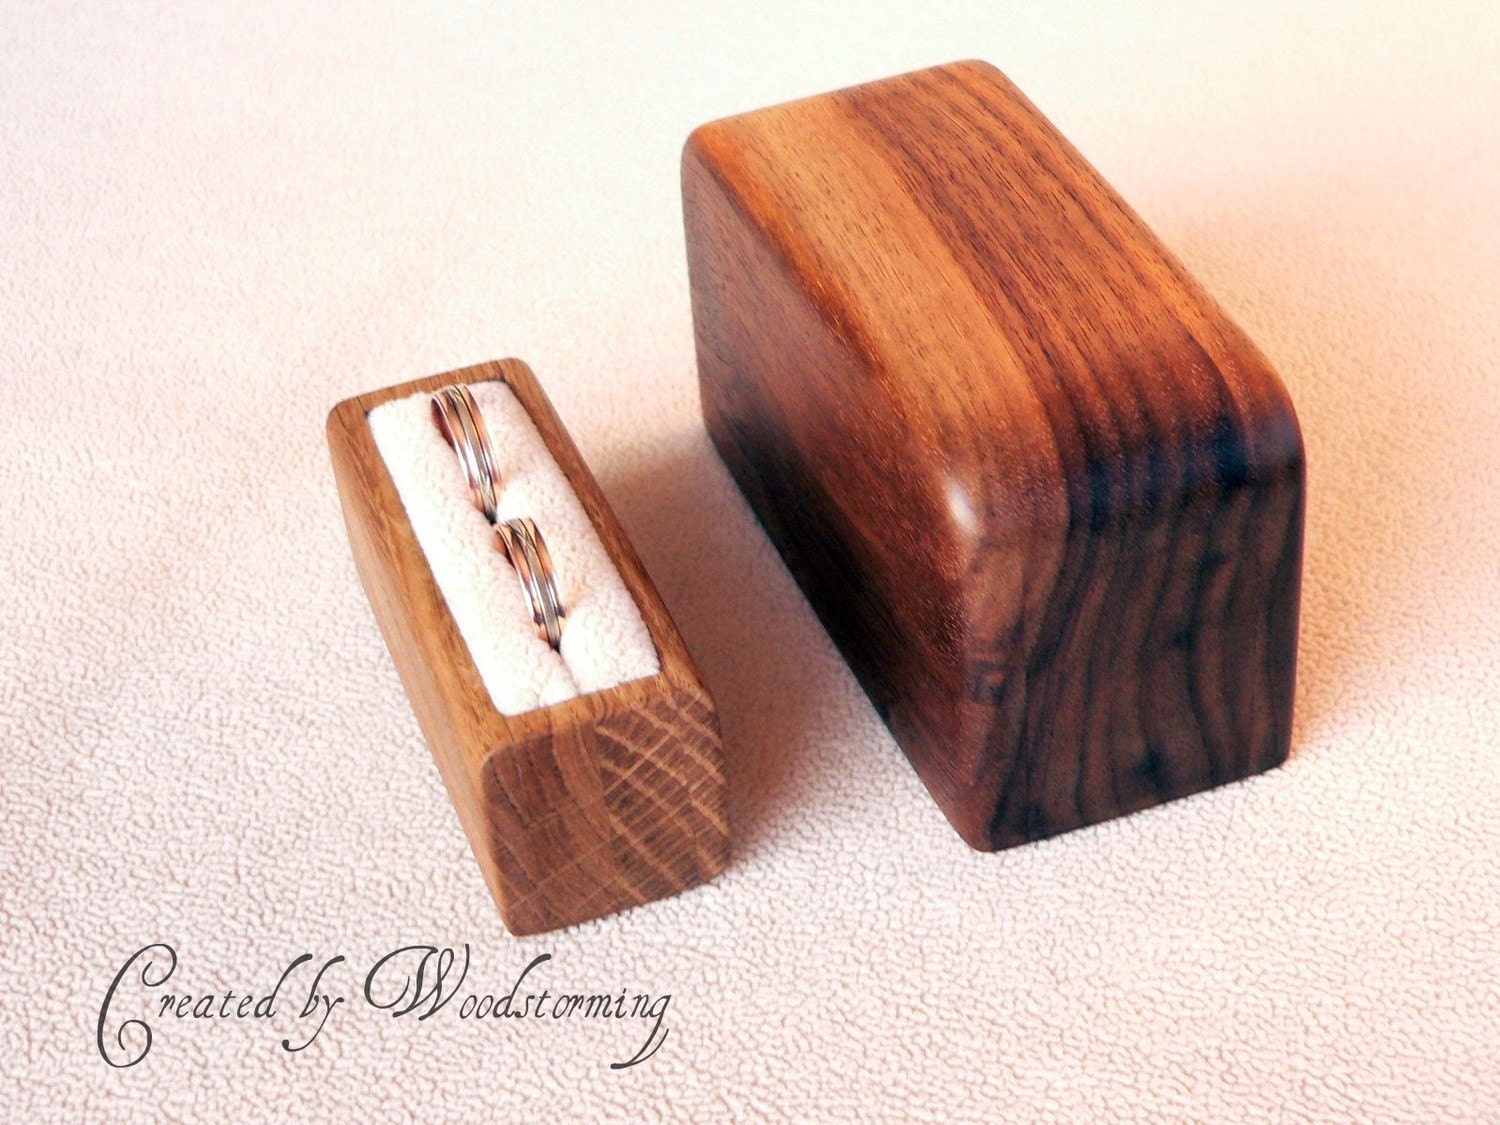 Wooden handmade original box for wedding rings by Woodstorming jewelry box